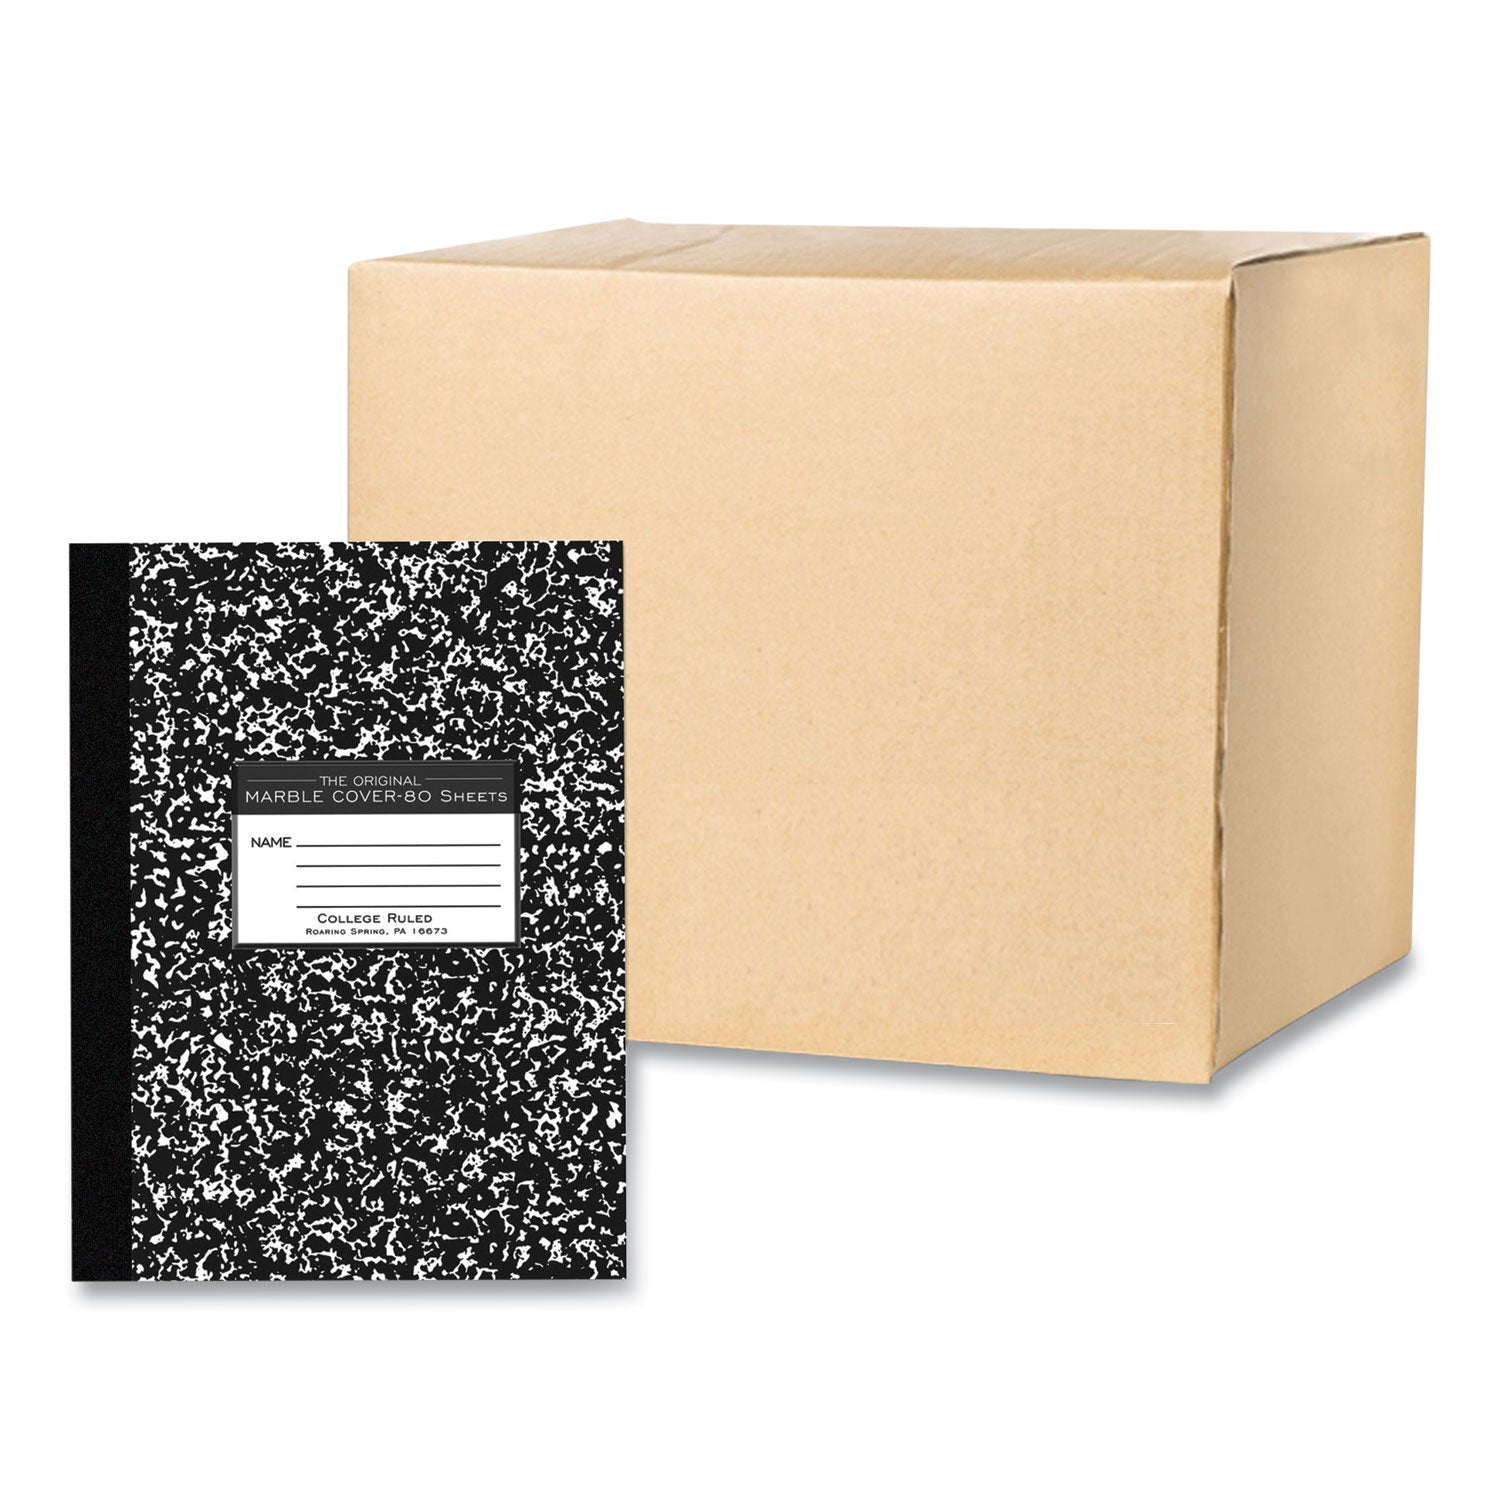 flexible-cover-composition-book-med-college-rule-black-marble-cover-80-1025-x-788-sheet-48-ct-ships-in-4-6-bus-days_roa77481cs - 1